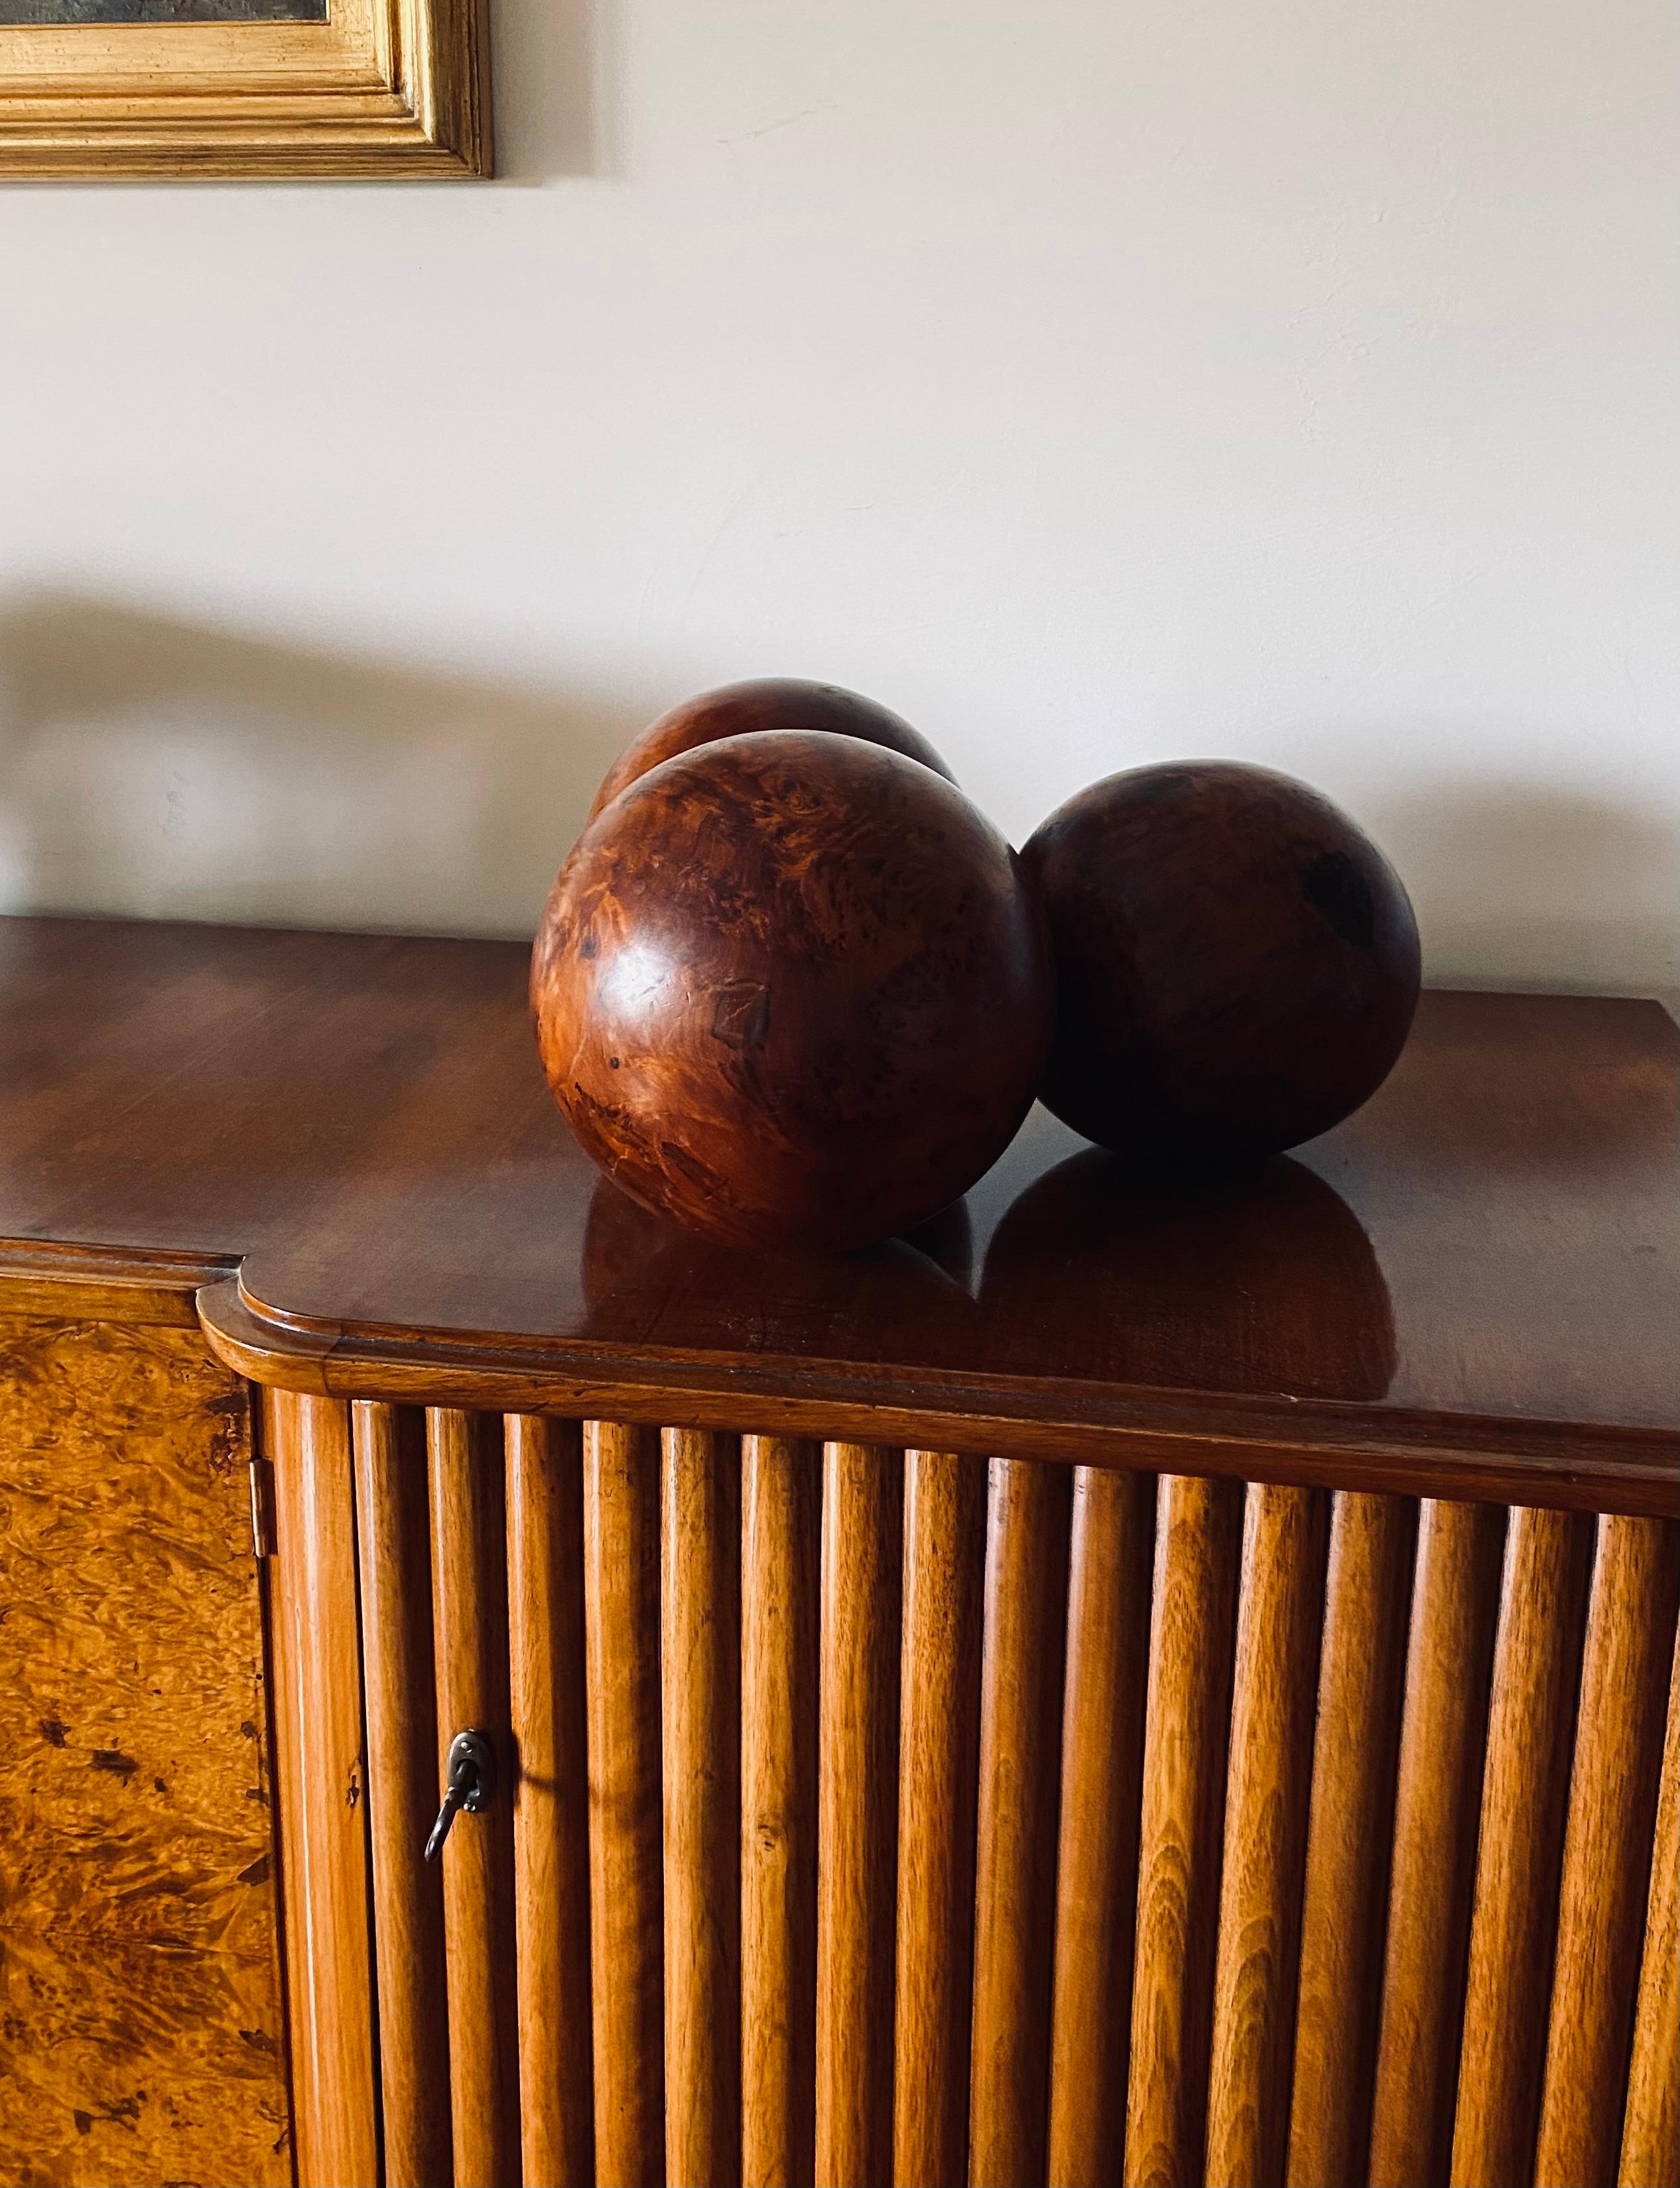 Set of 3 wooden spherical sculptures

France 1960s

Diam. 22.5 cm - 21 cm - 19.5 cm

Conditions: excellent consistent with age and use.